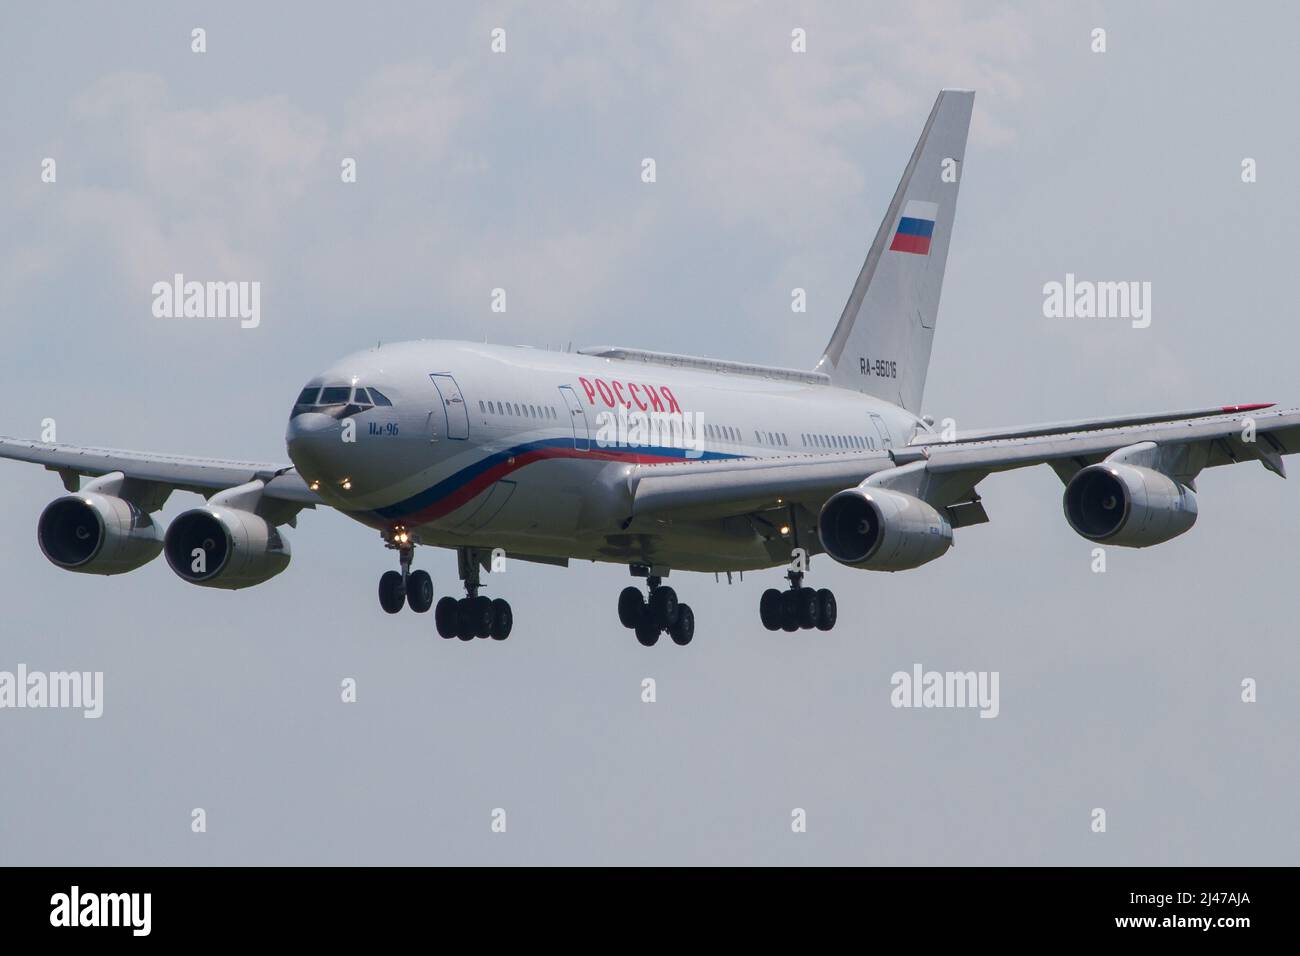 Presidential aircraft of russian president Vladimir Putin arriving in Graz, Austria for a state visit Stock Photo